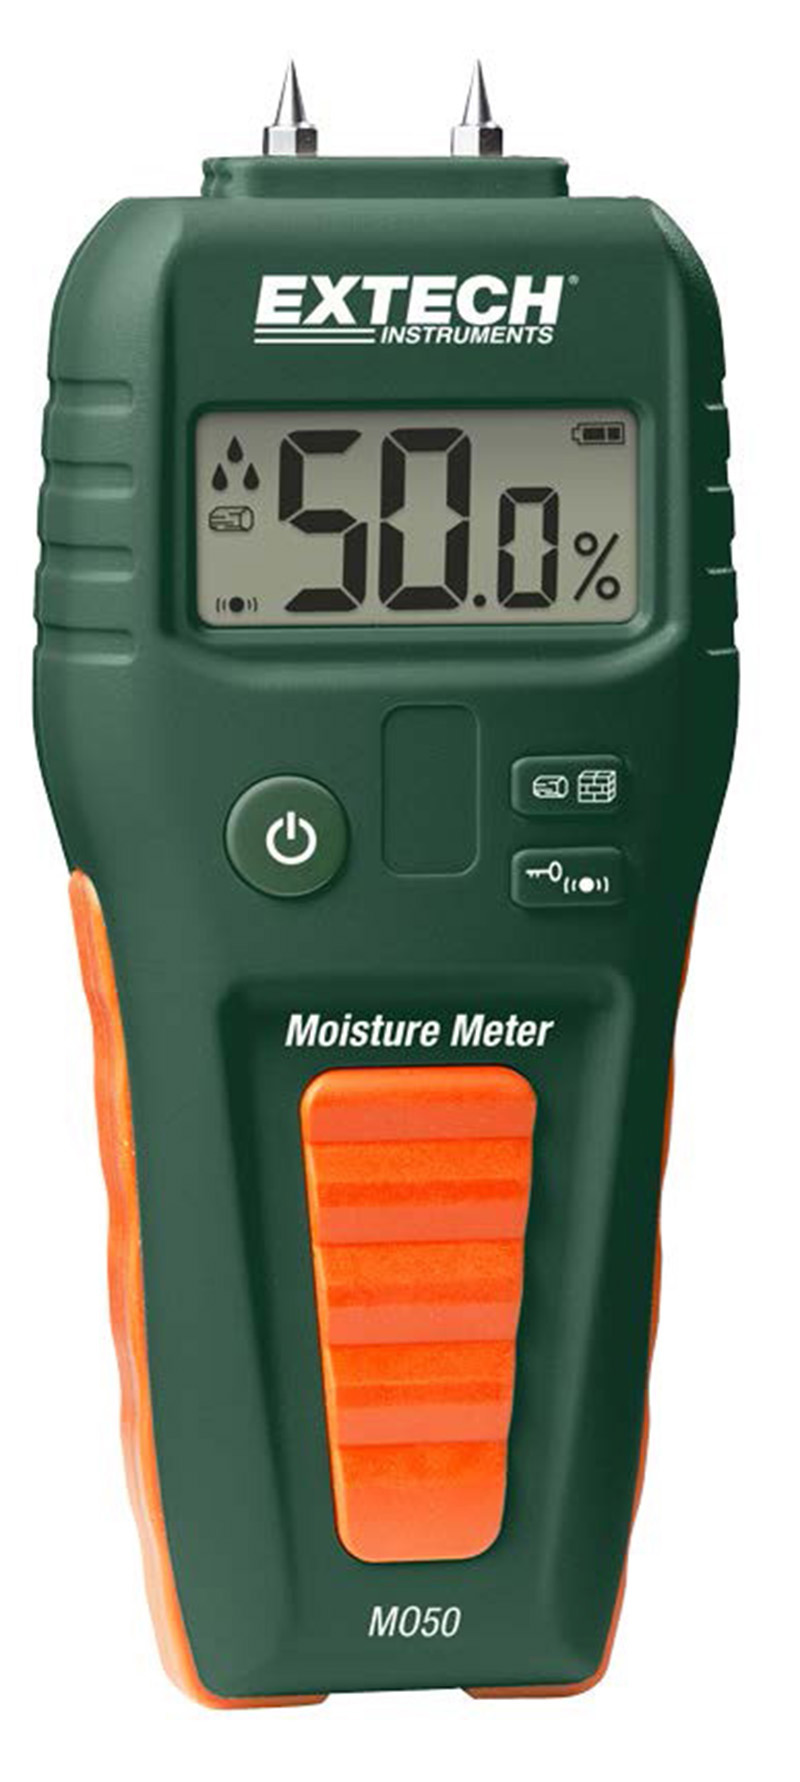 Take quick moisture level reference measurements on wood and building materials with this convenient compact-sized Moisture Meter.